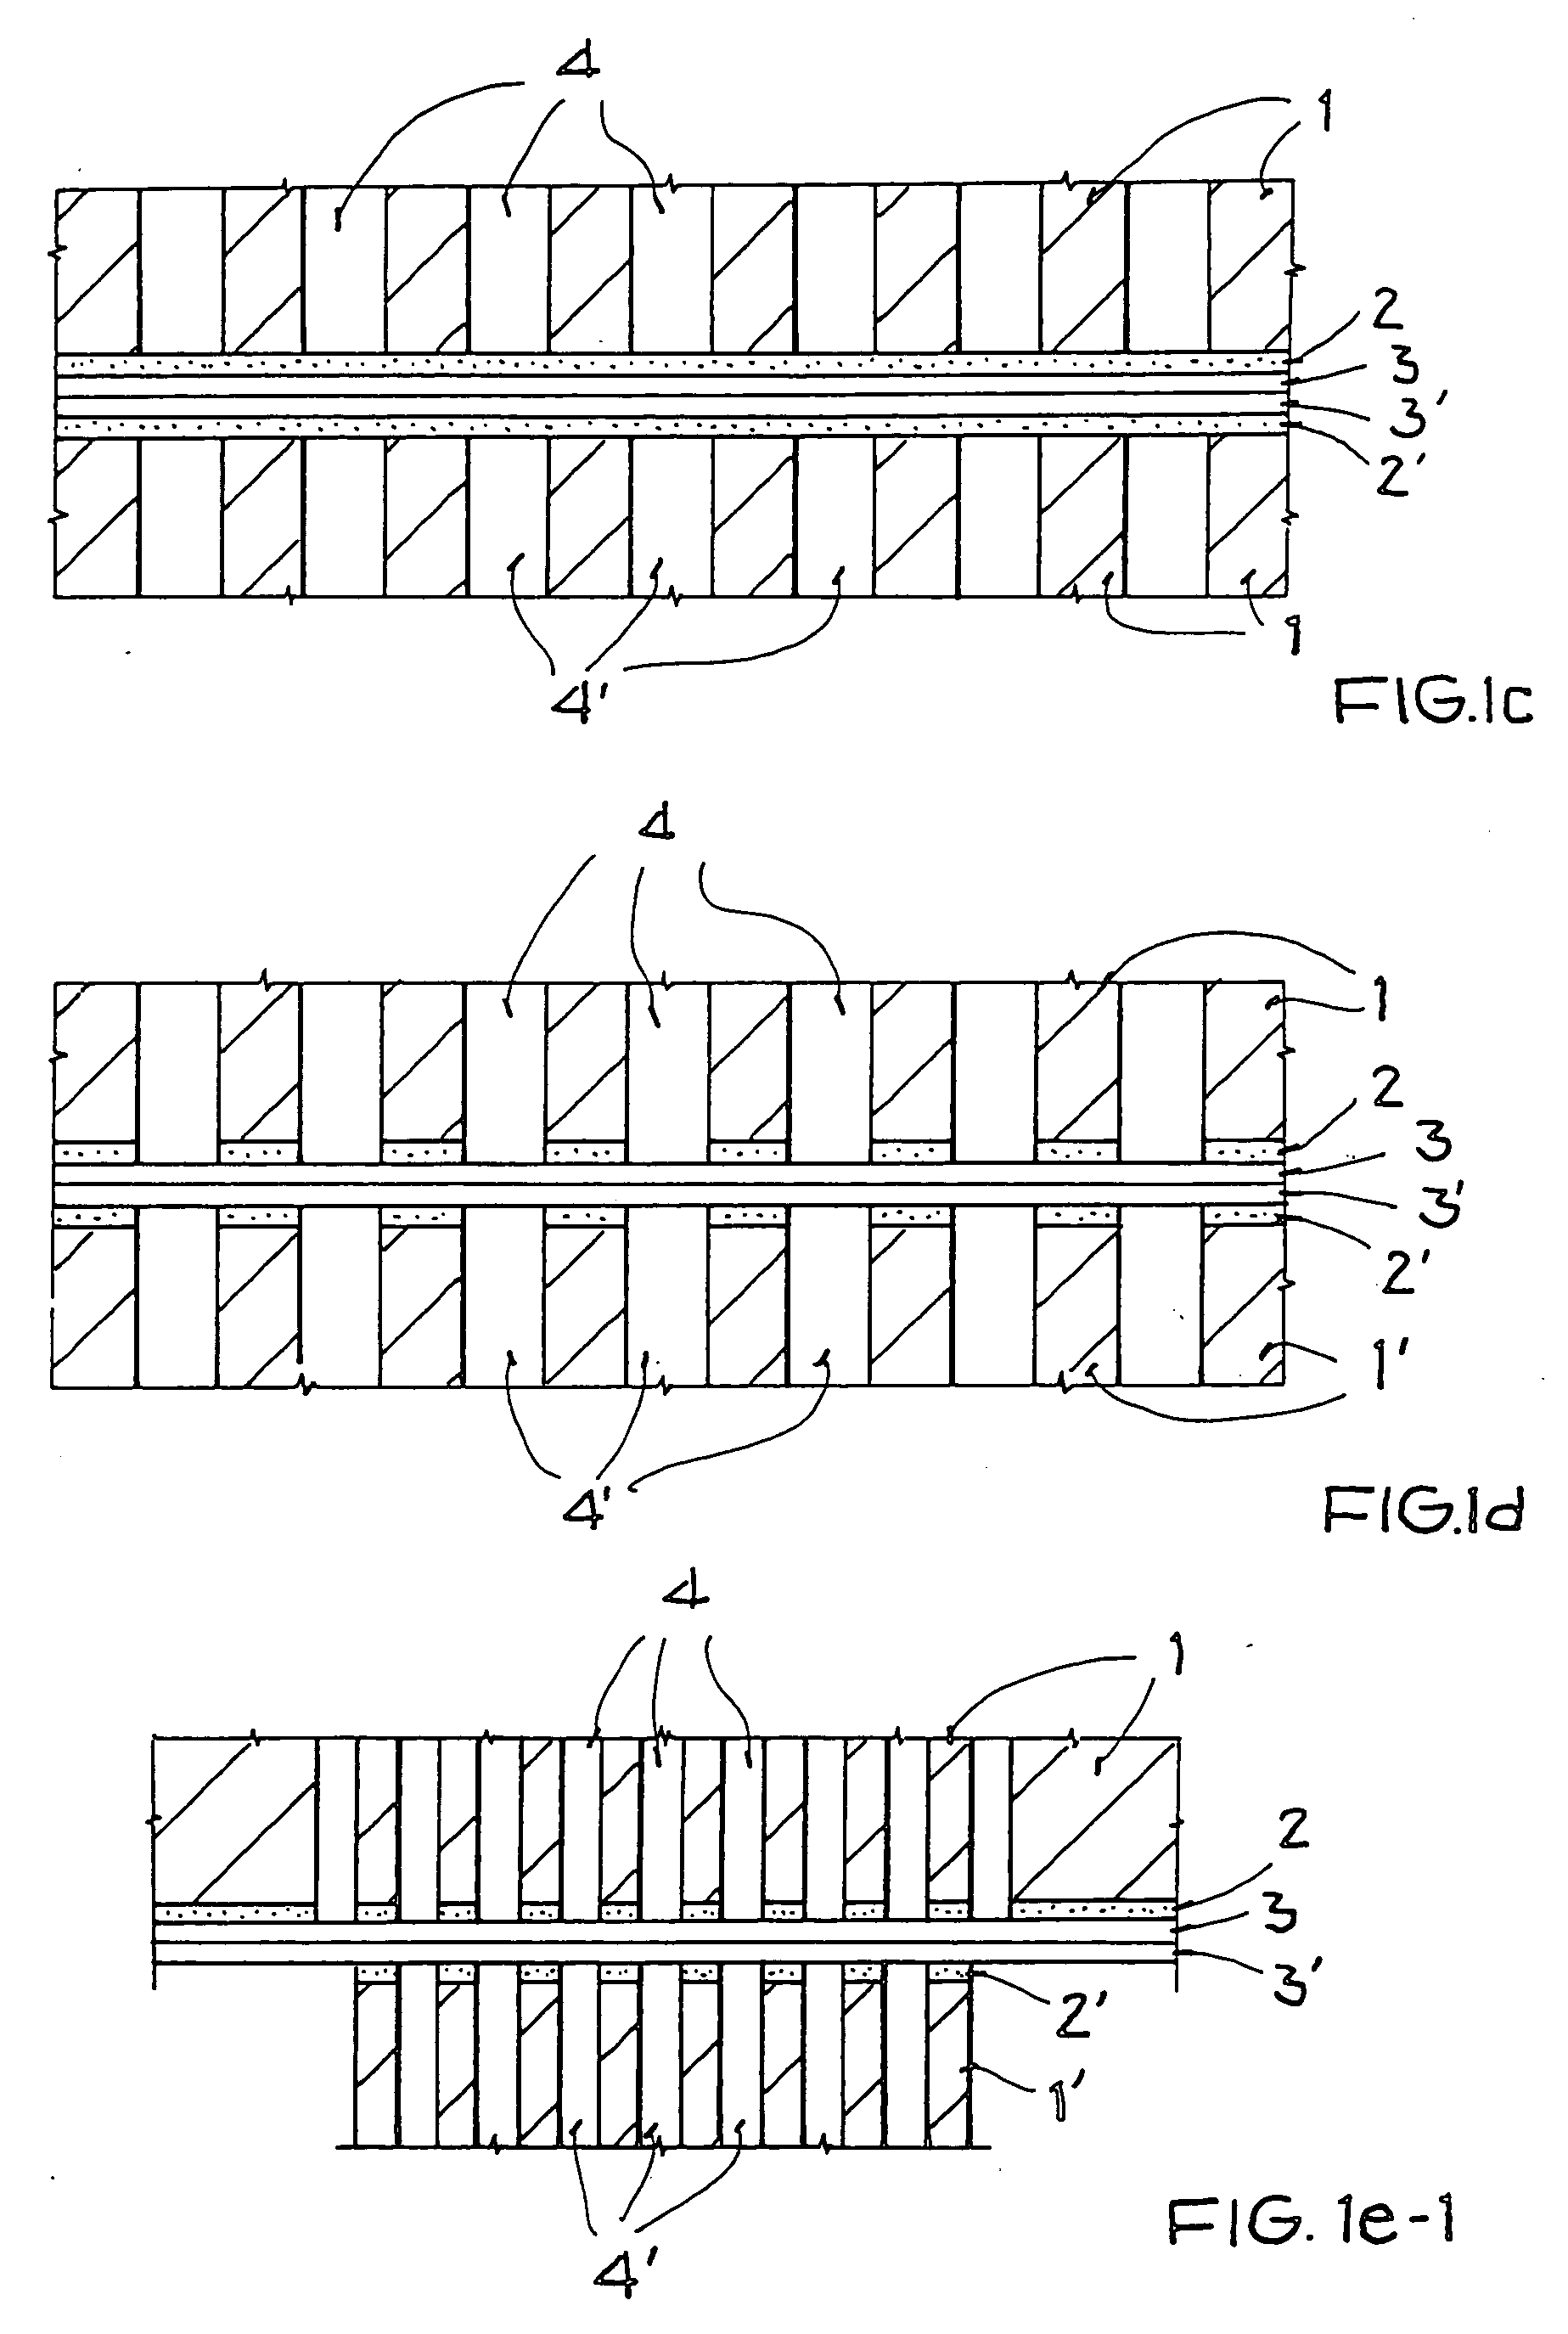 Method for forming a photonic band-gap structure and a device fabricated in accordance with such a method